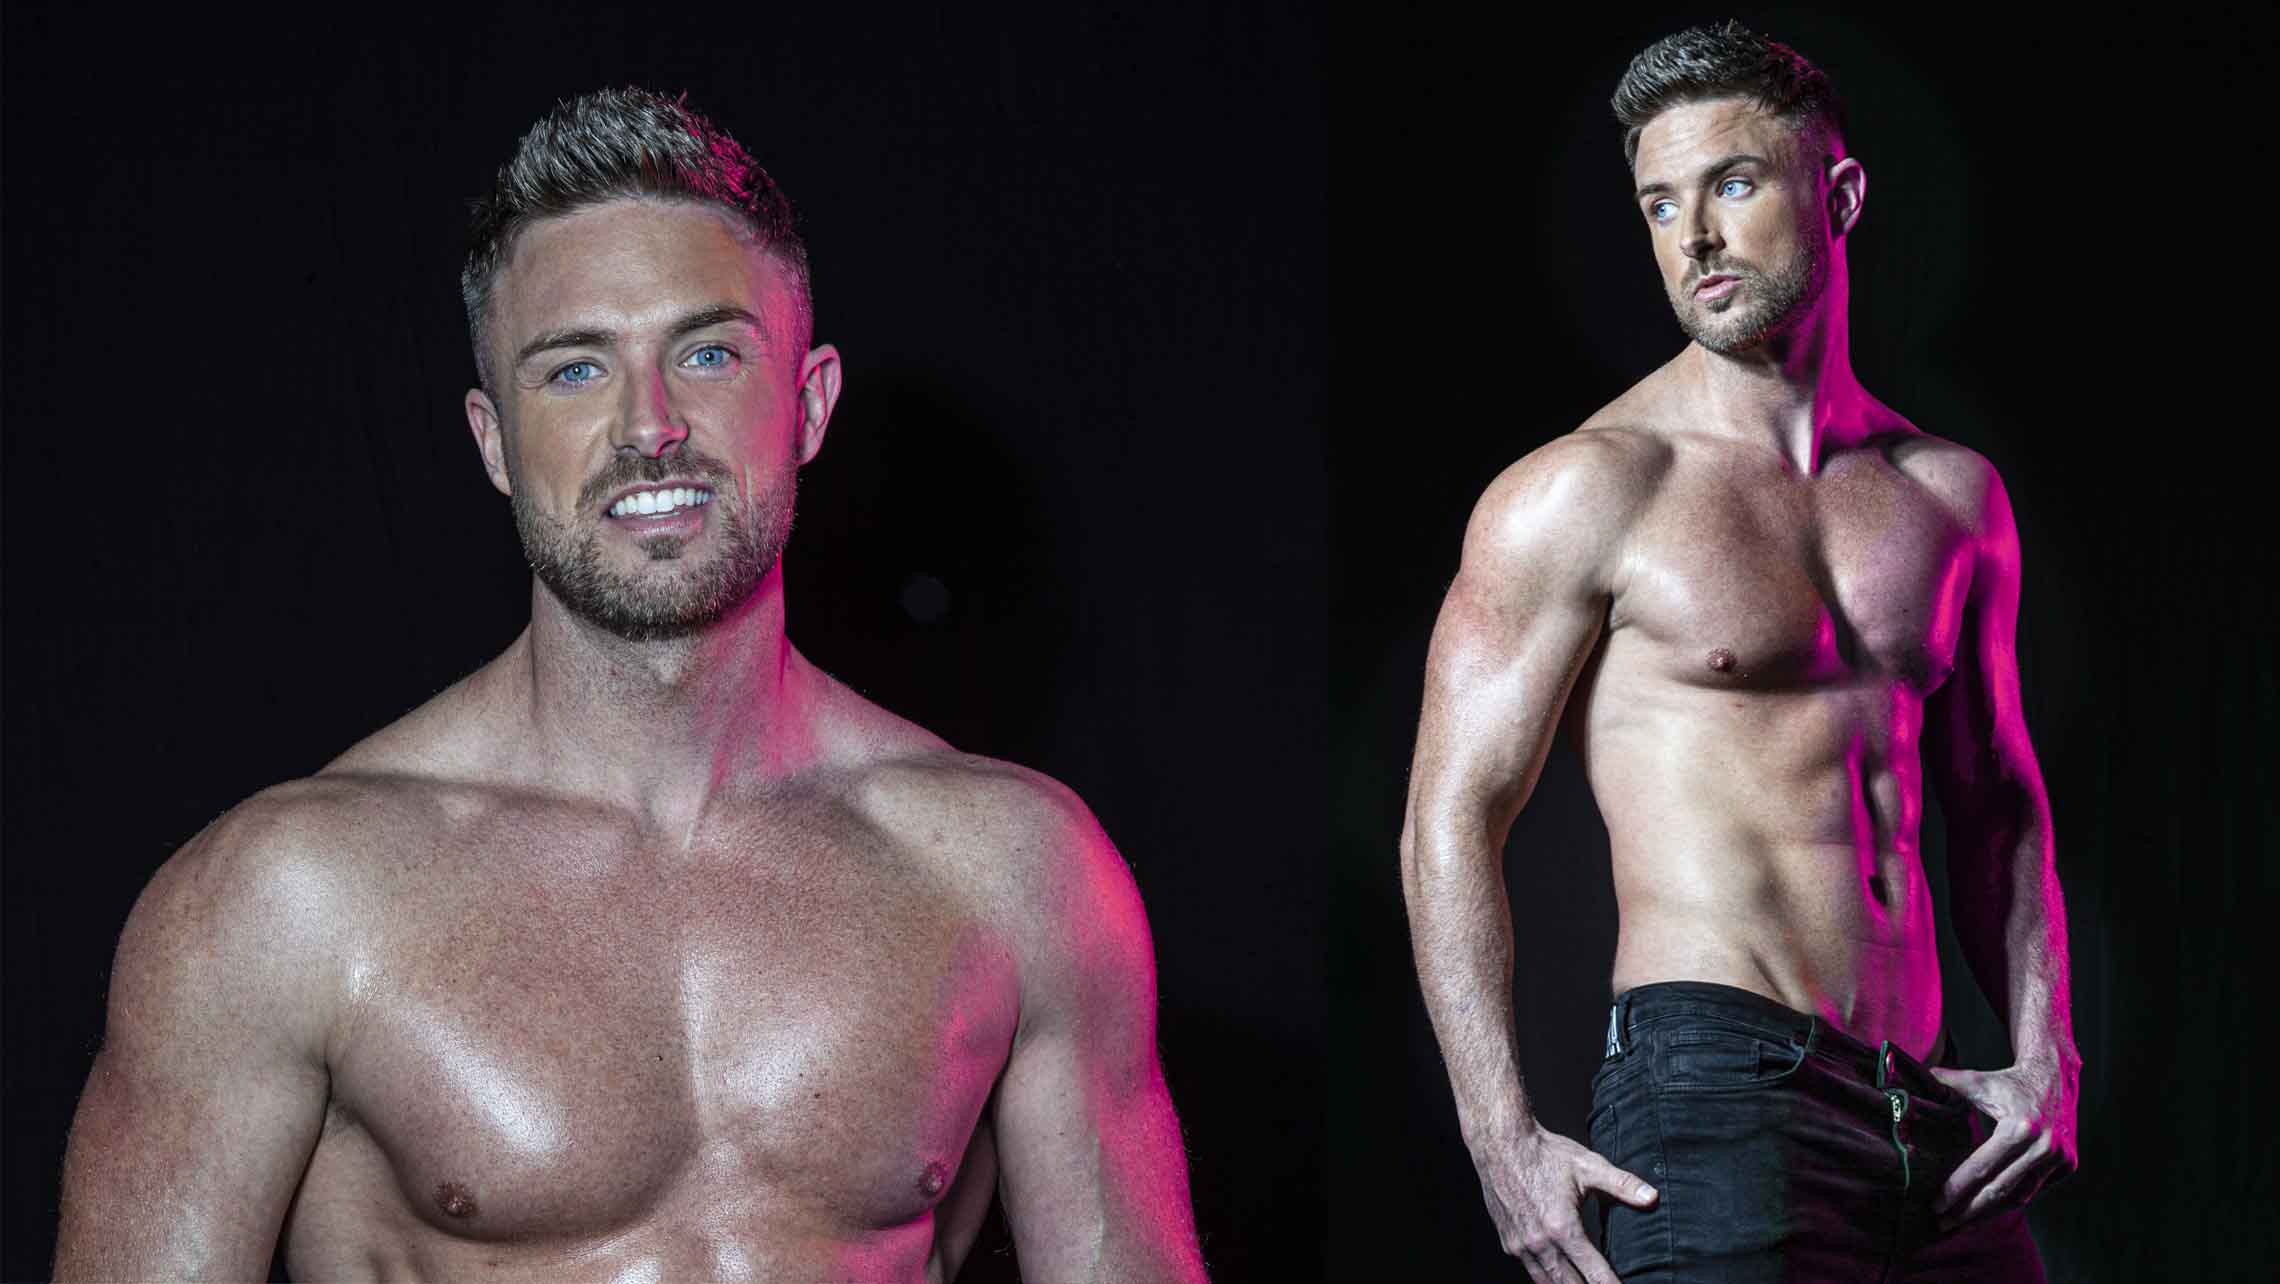  male strip show blog | Who is Celebs Go Dating star and Dreamboy Shane Finlayson?